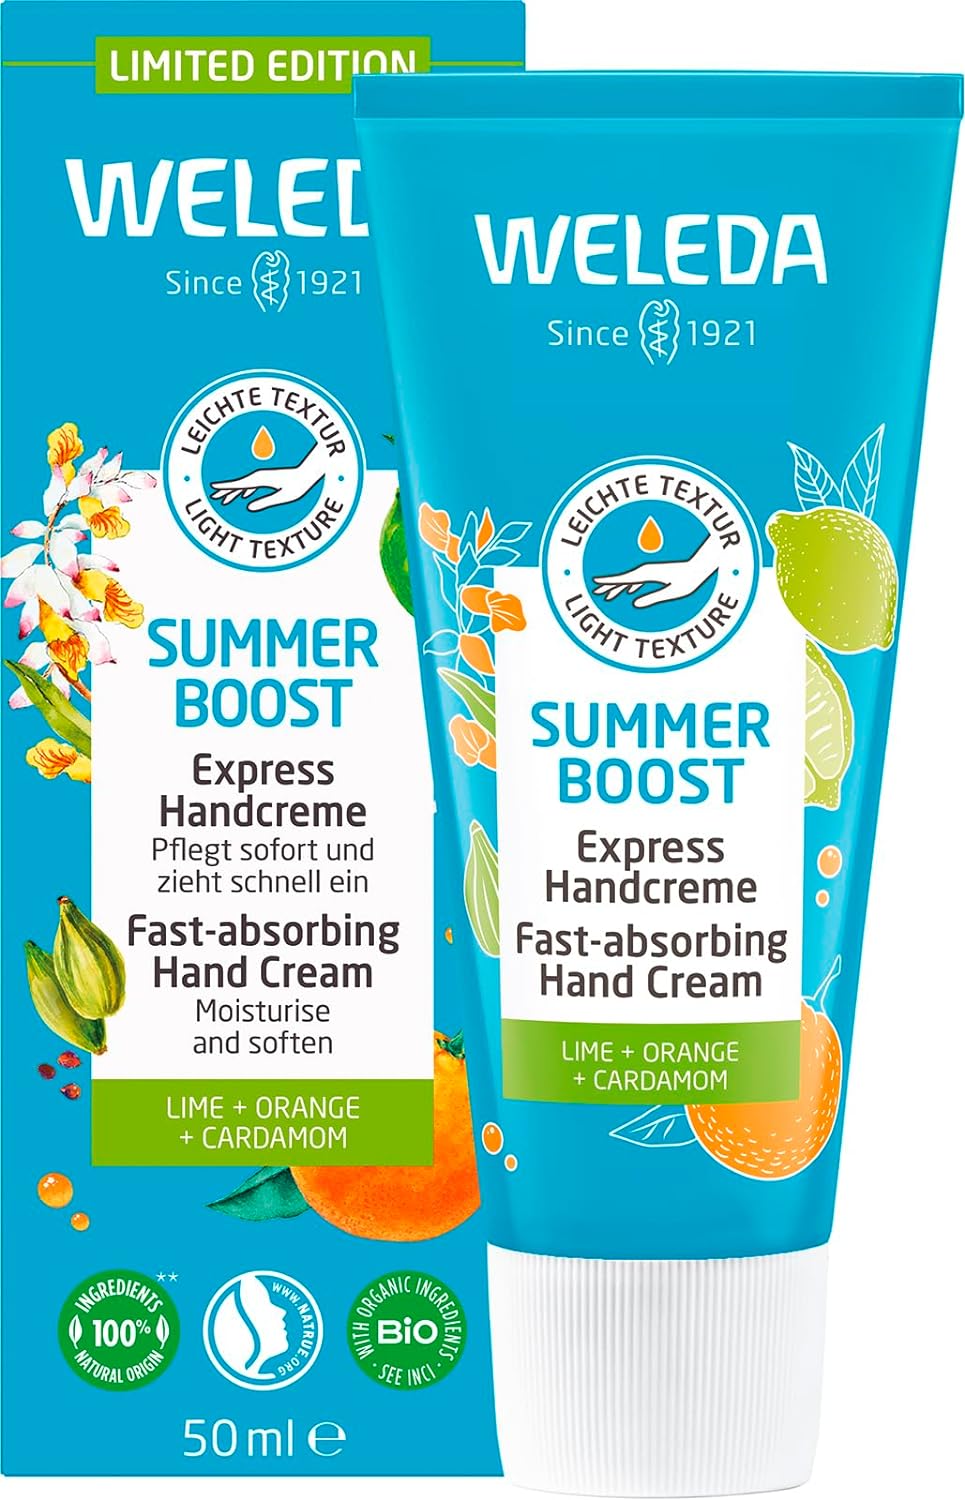 WELEDA Bio Summer Boost Express Hand Cream - Limited Edition Natural Cosmetics Hand Care Cream with Sesame Oil & Beeswax. Hand Lotion with Fragrance of Lime, Orange & Cardamom for Dry Hands (1 x 50